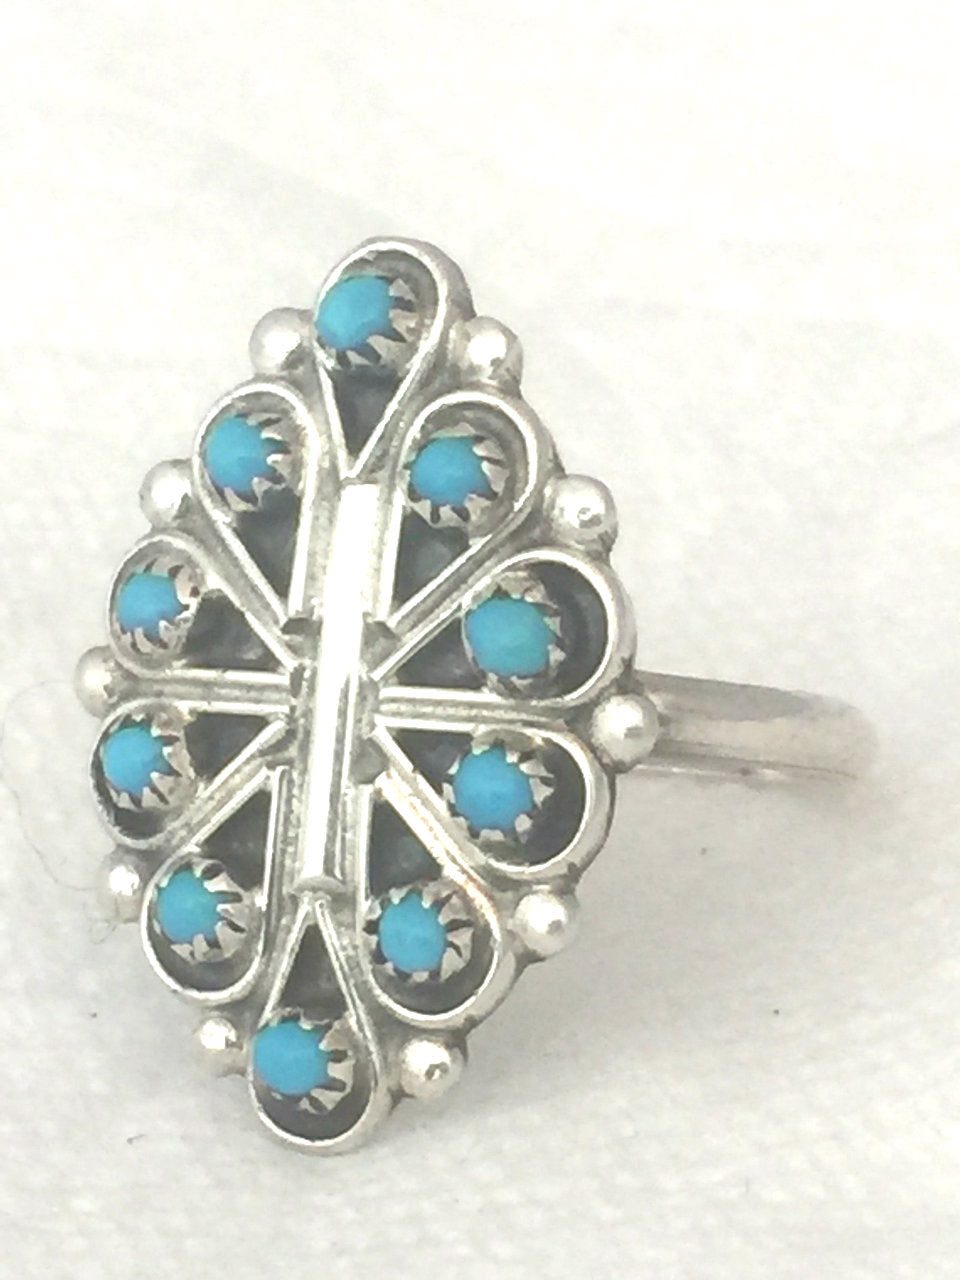 Zuni Turquoise Ring Vintage Sterling Silver Native American Size 7 Signed R Dishta